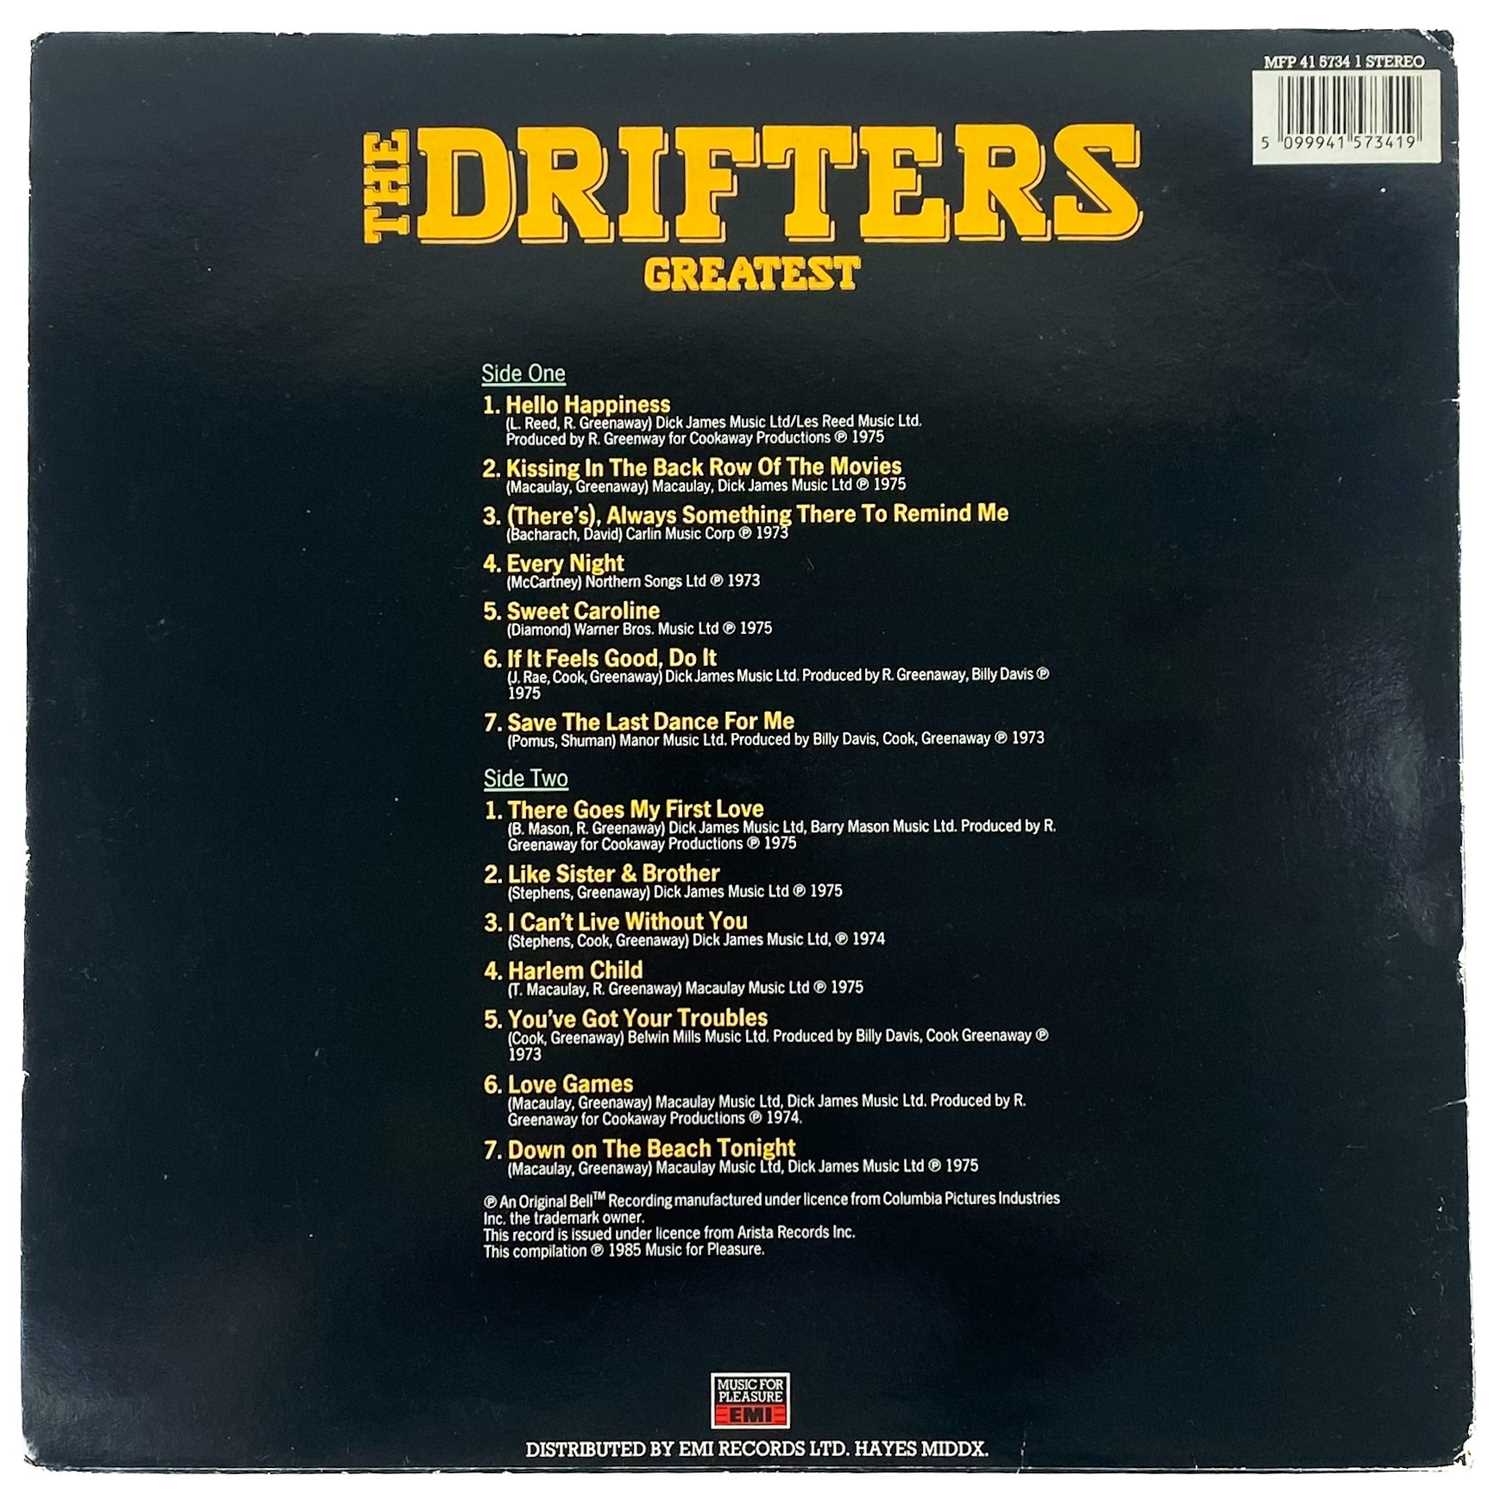 Signed; The Drifters - Image 8 of 11